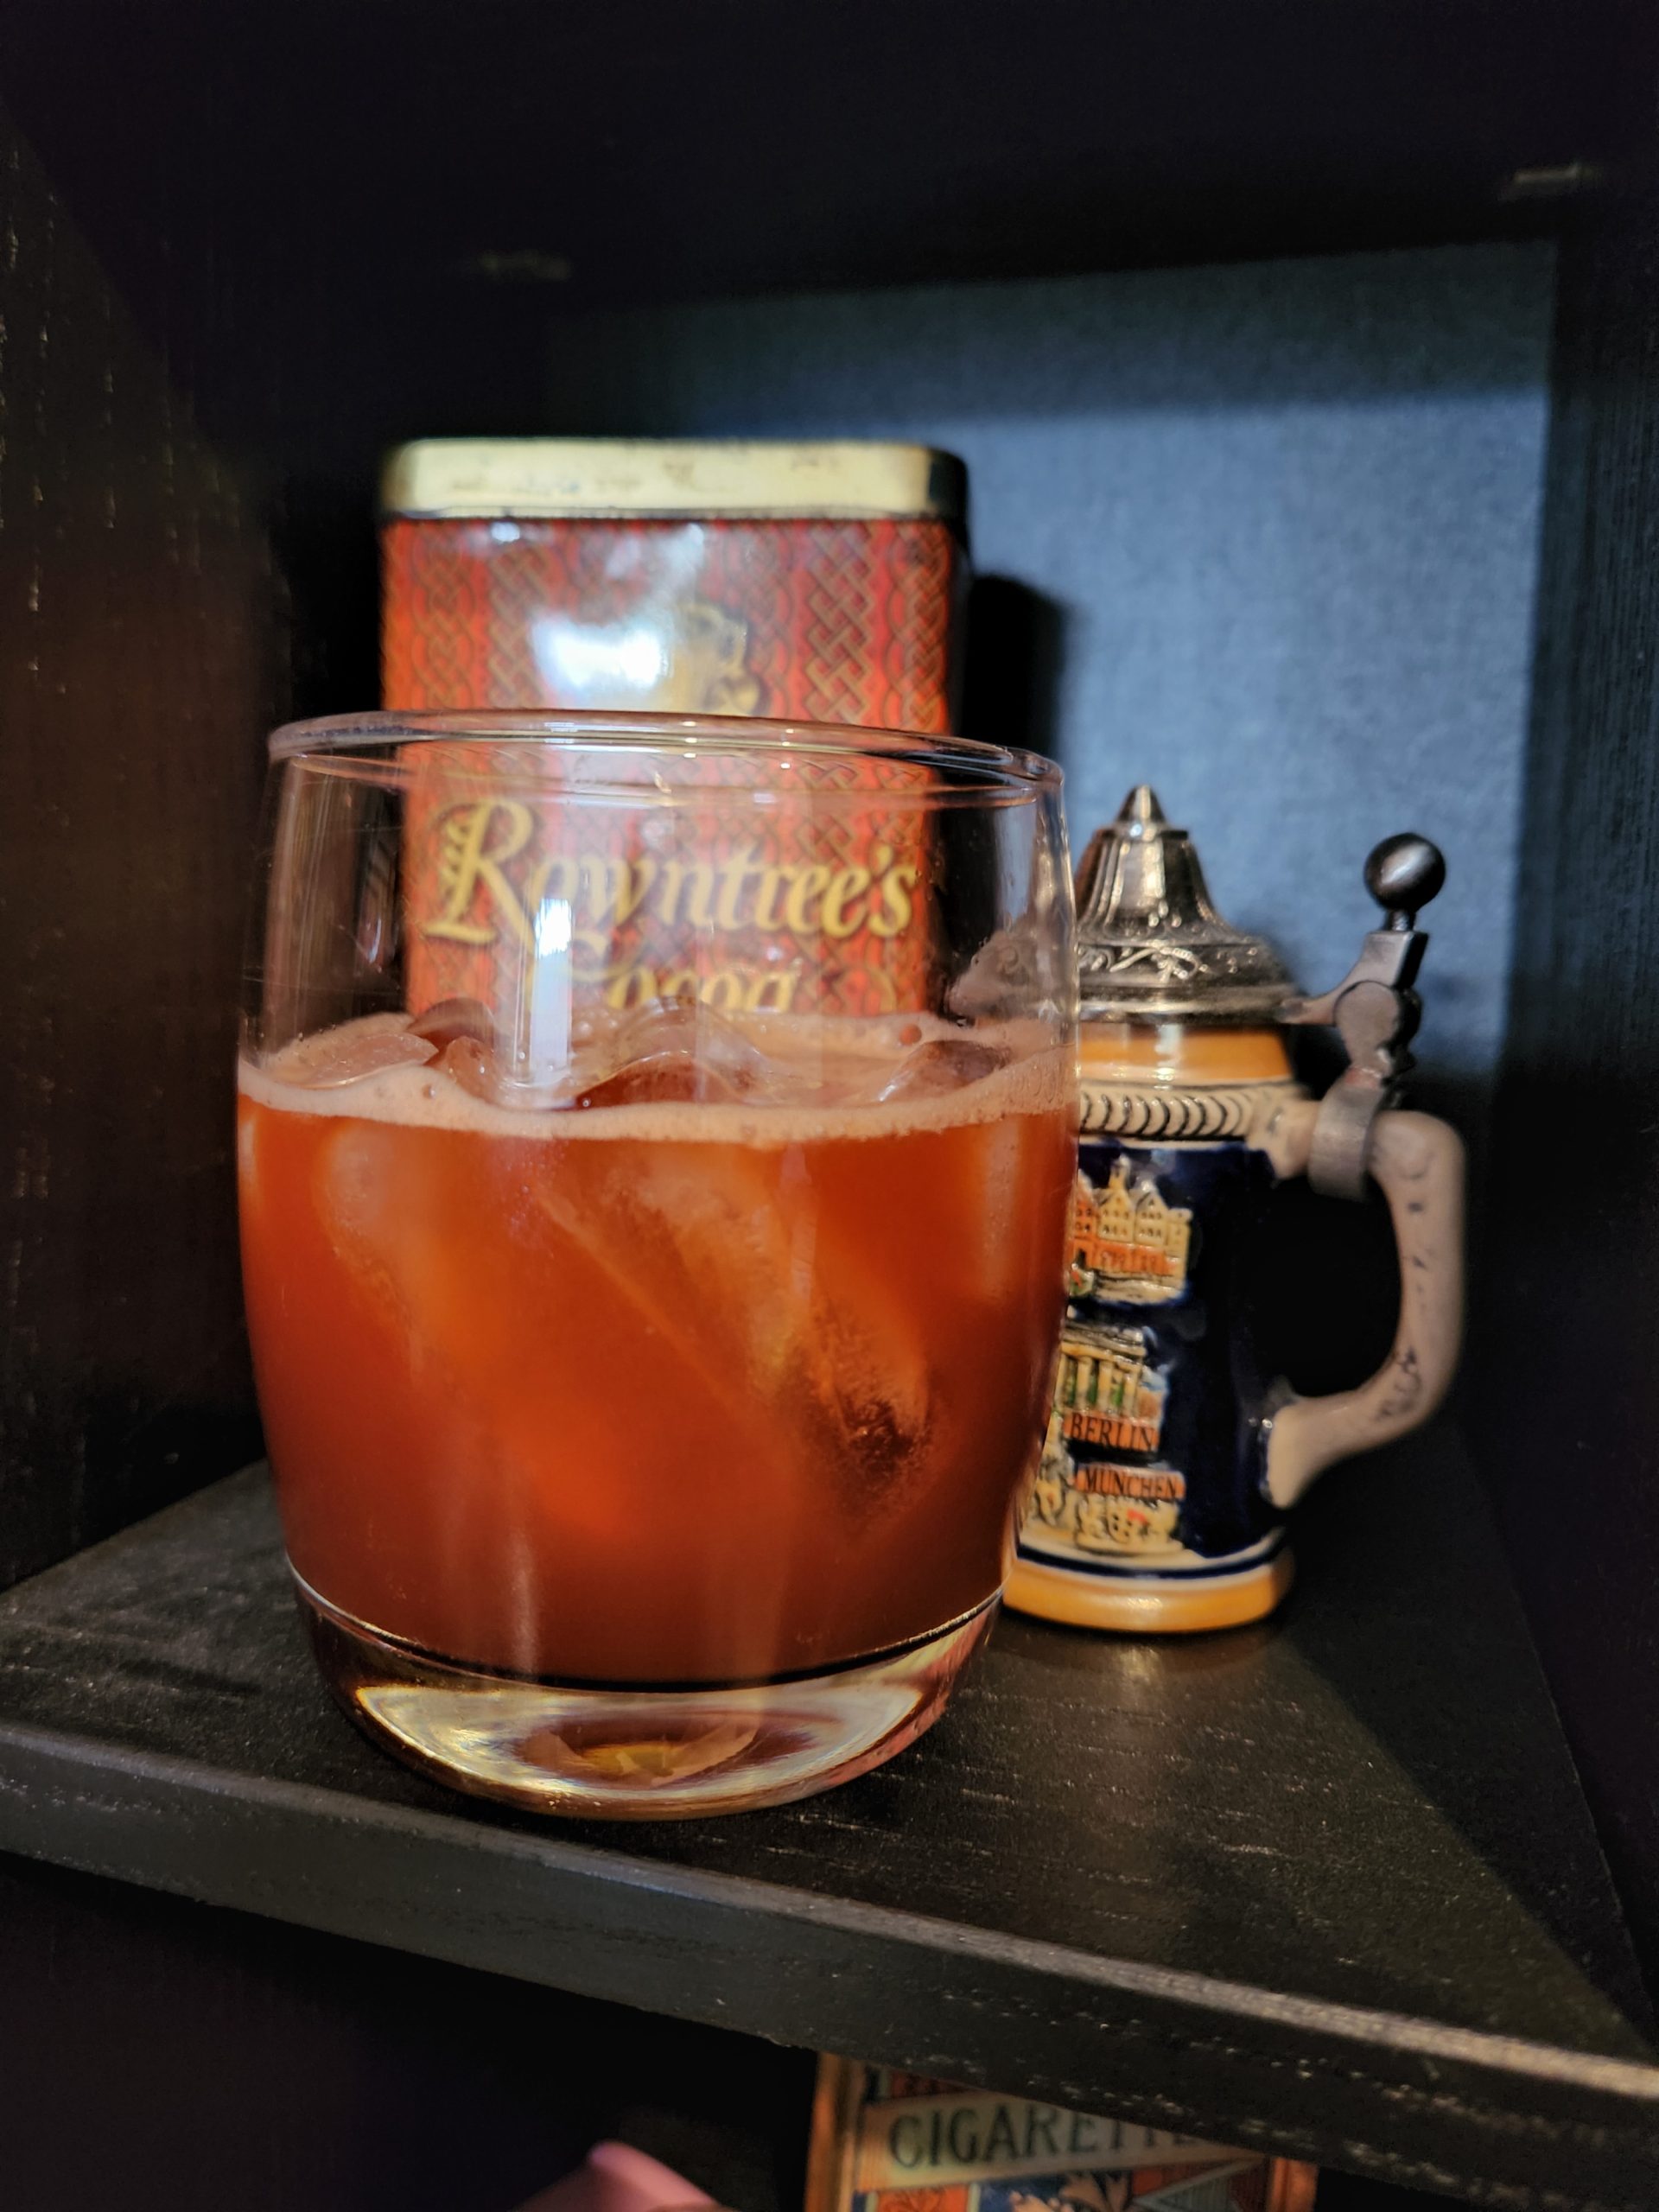 California Surfer cocktail on a bookshelf in front of a mini German beer stein.